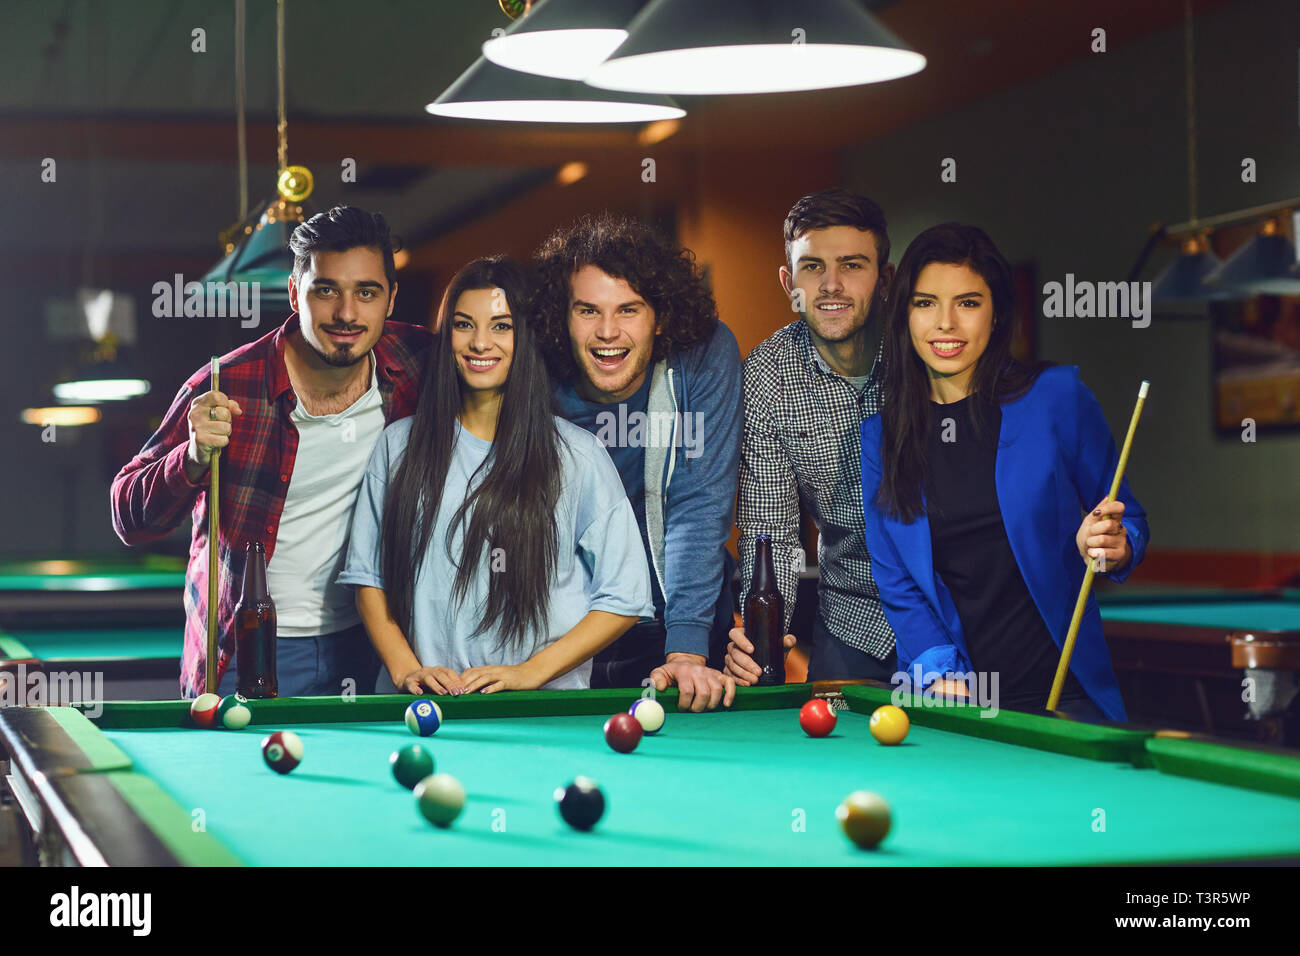 A group of young people playing fun billiards. Stock Photo